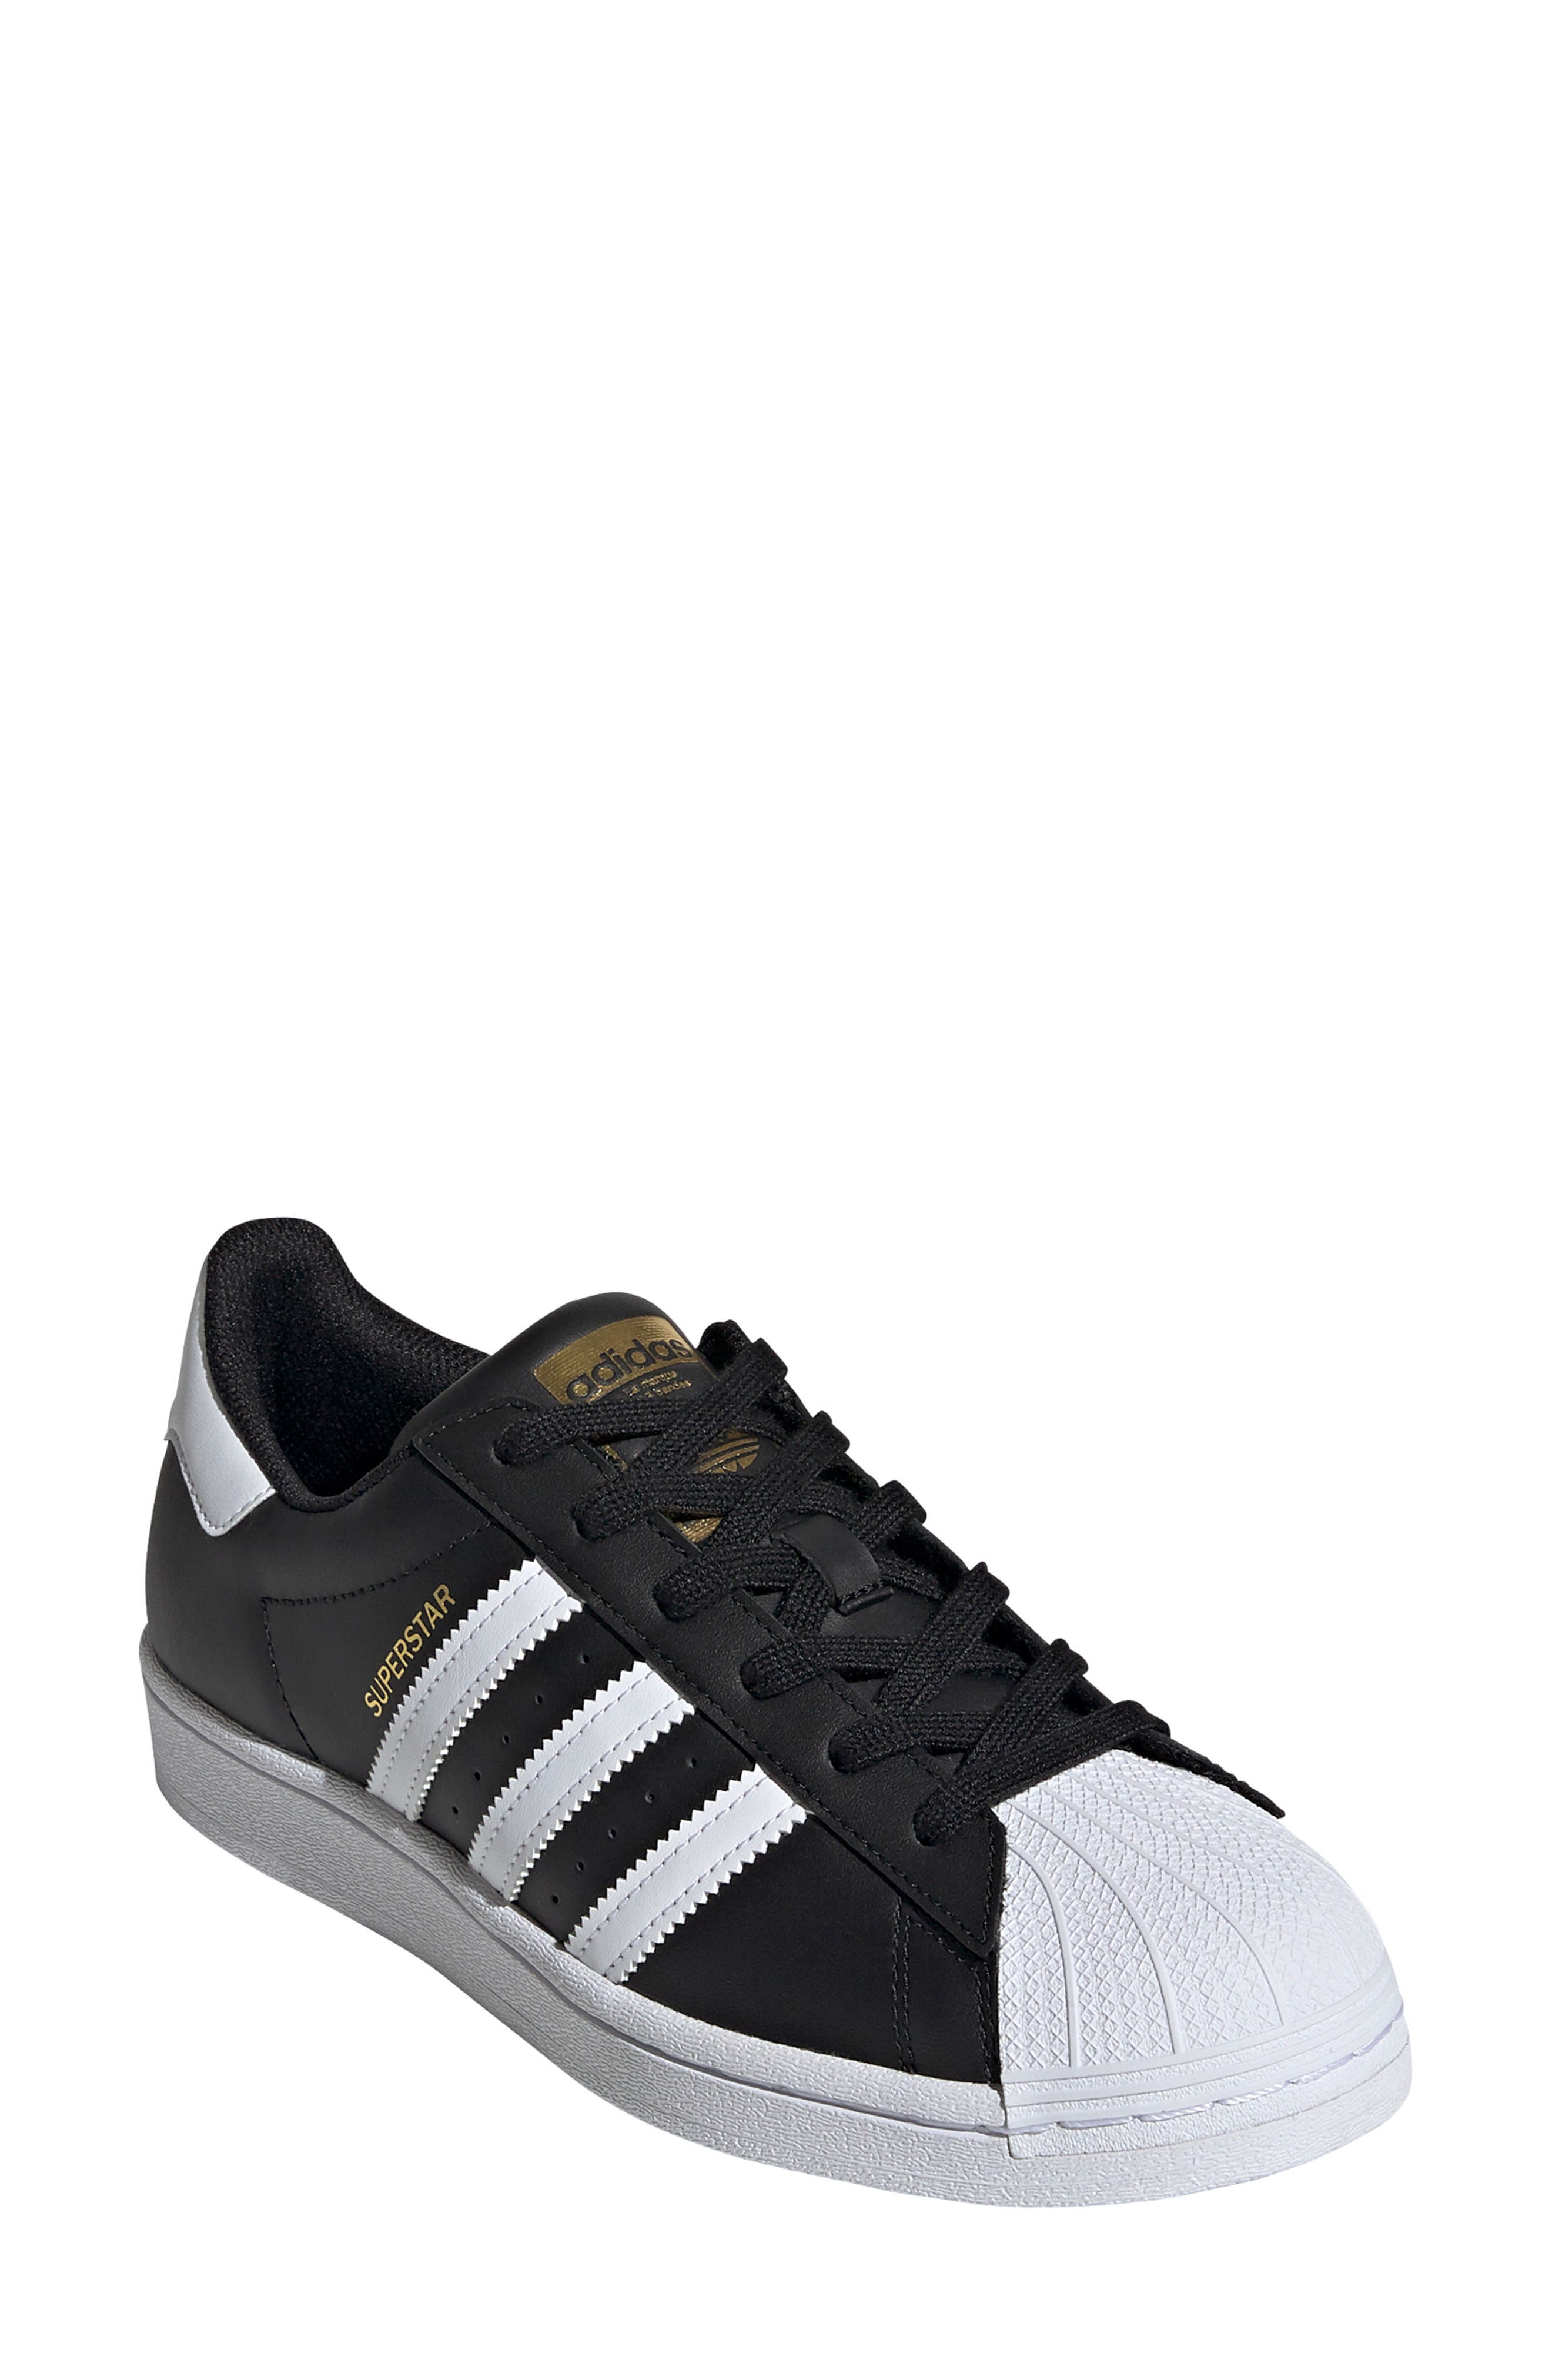 nordstrom adidas shoes